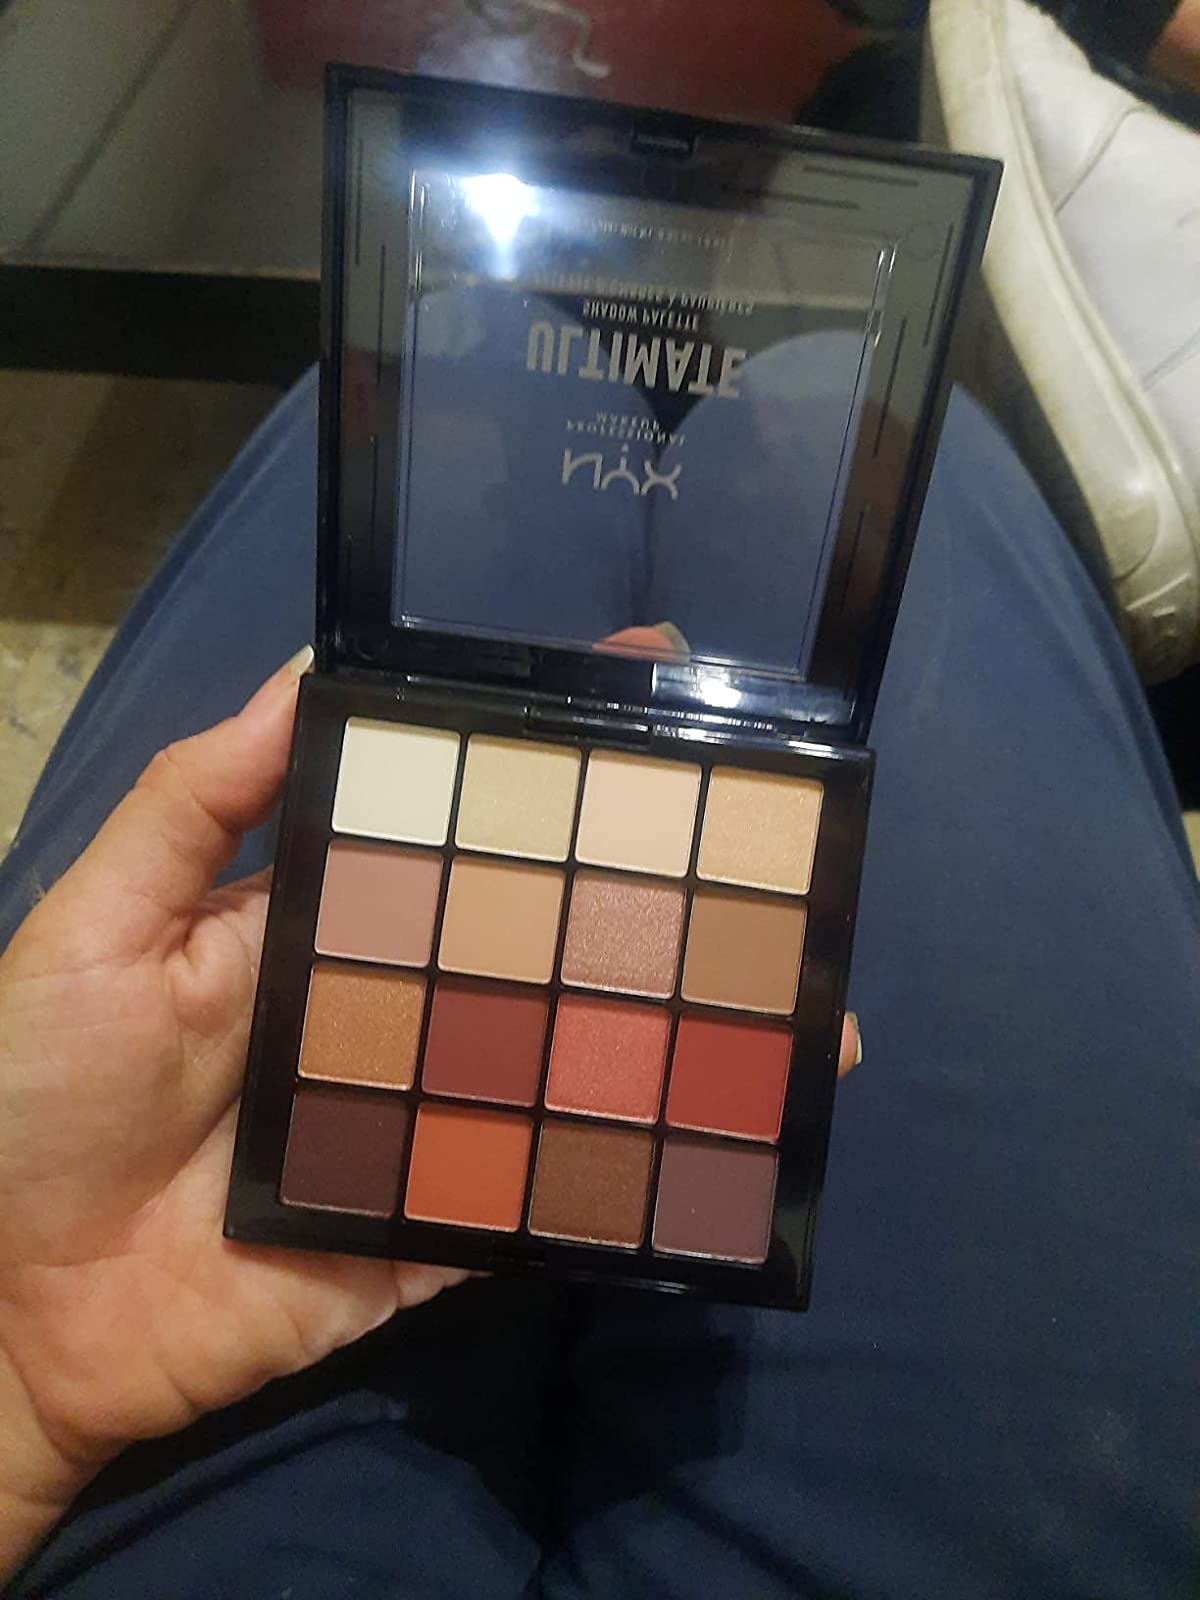 Reviewer holding the eyeshadow palette